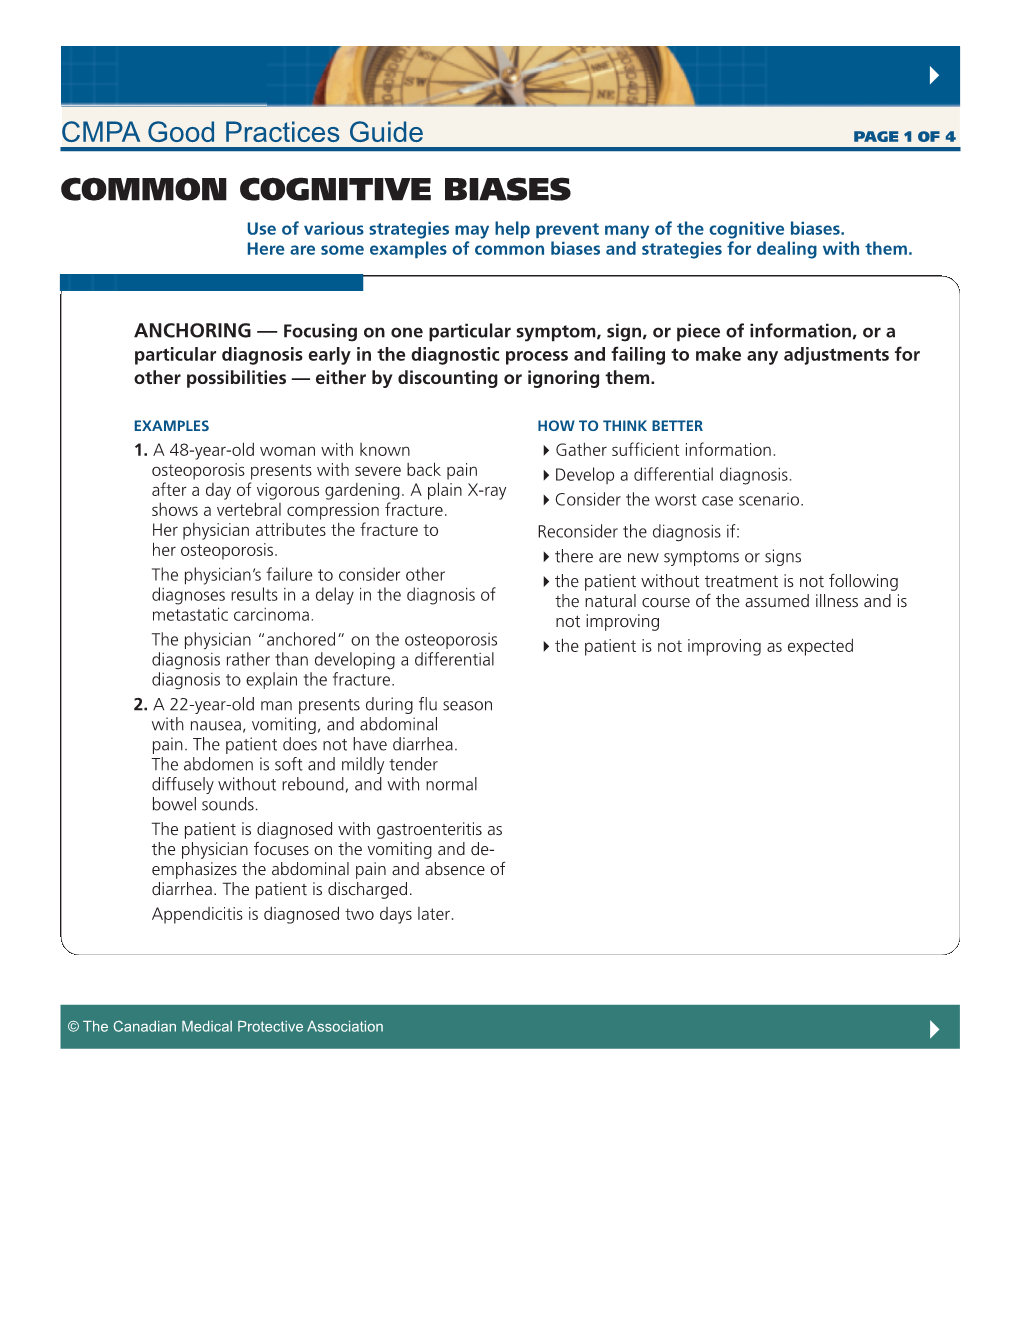 Good Practices Guide Common Cognitive Biases